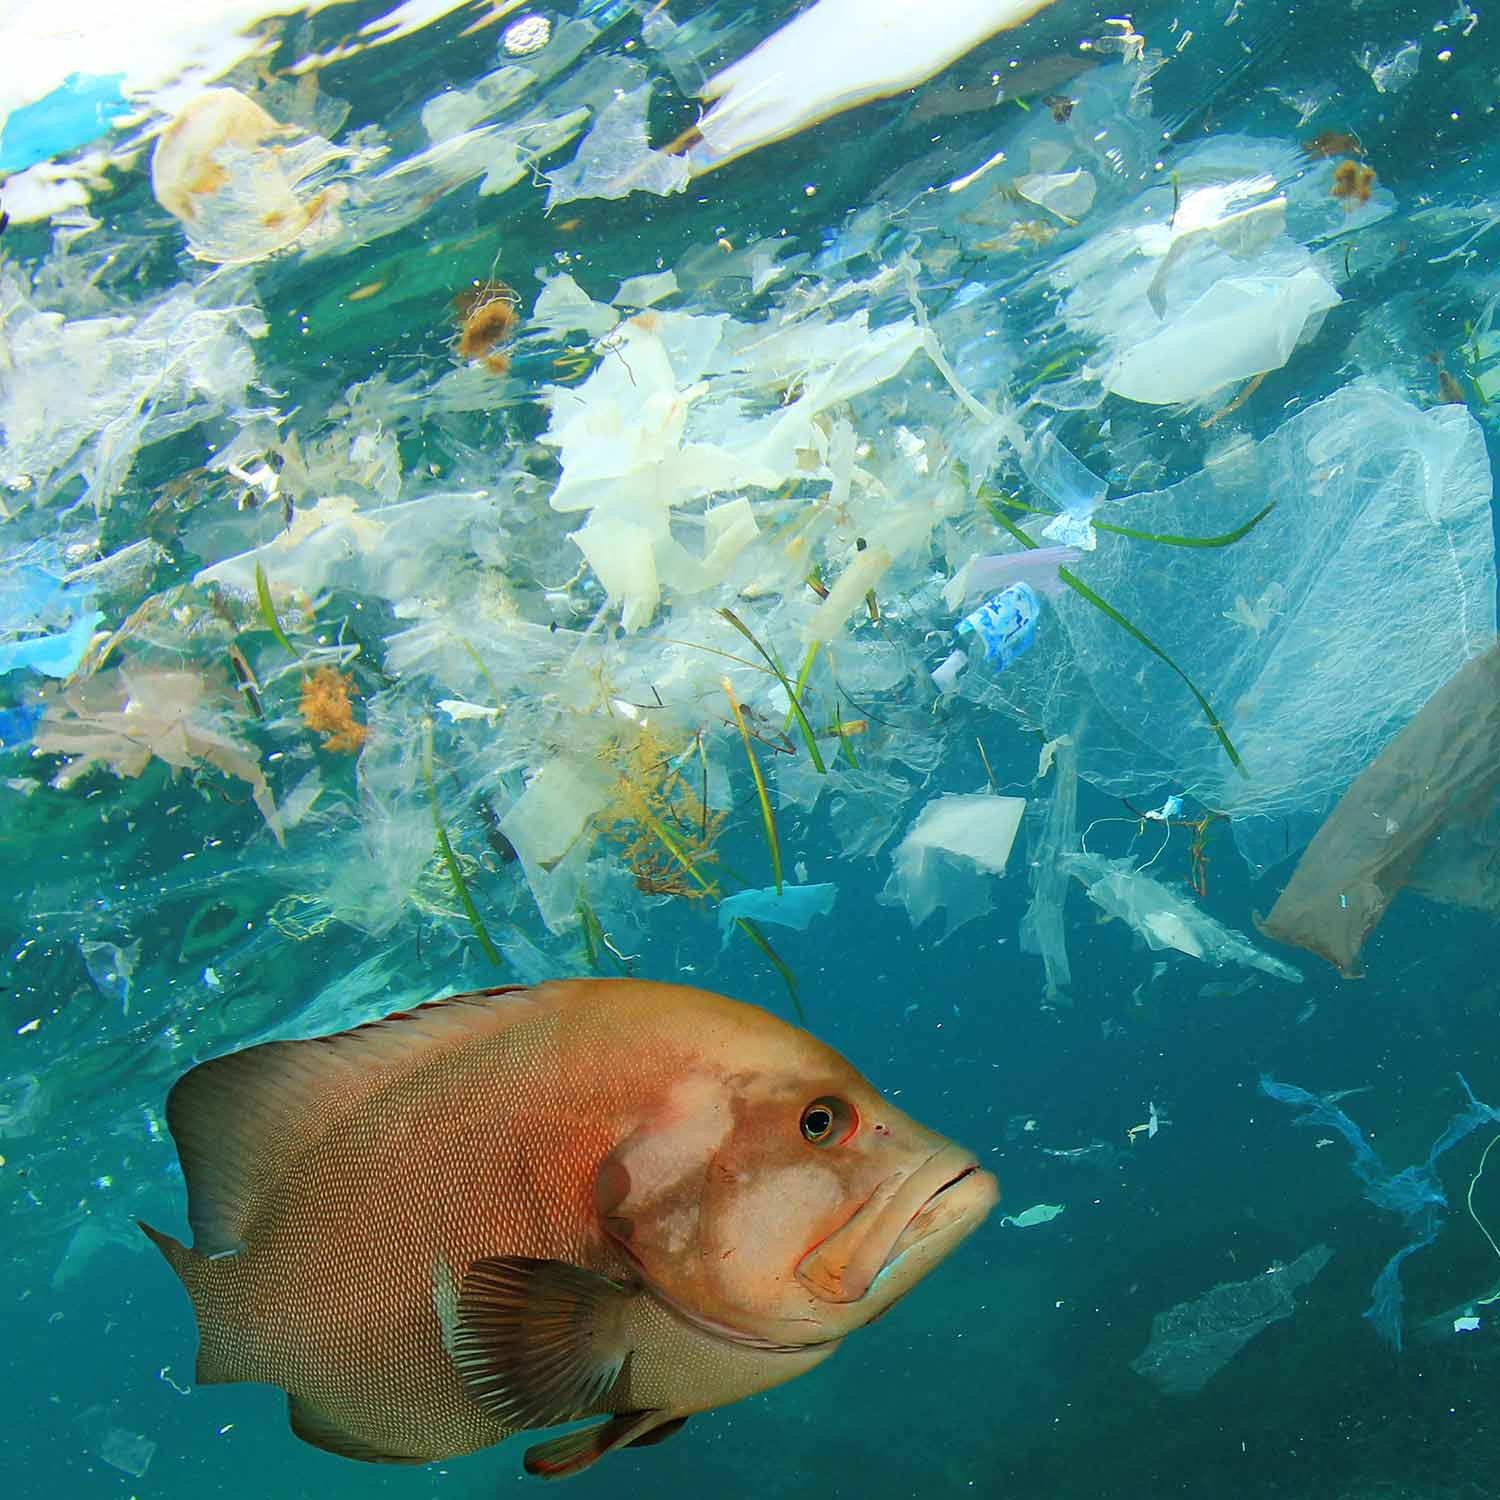 Image of a fish in among litter